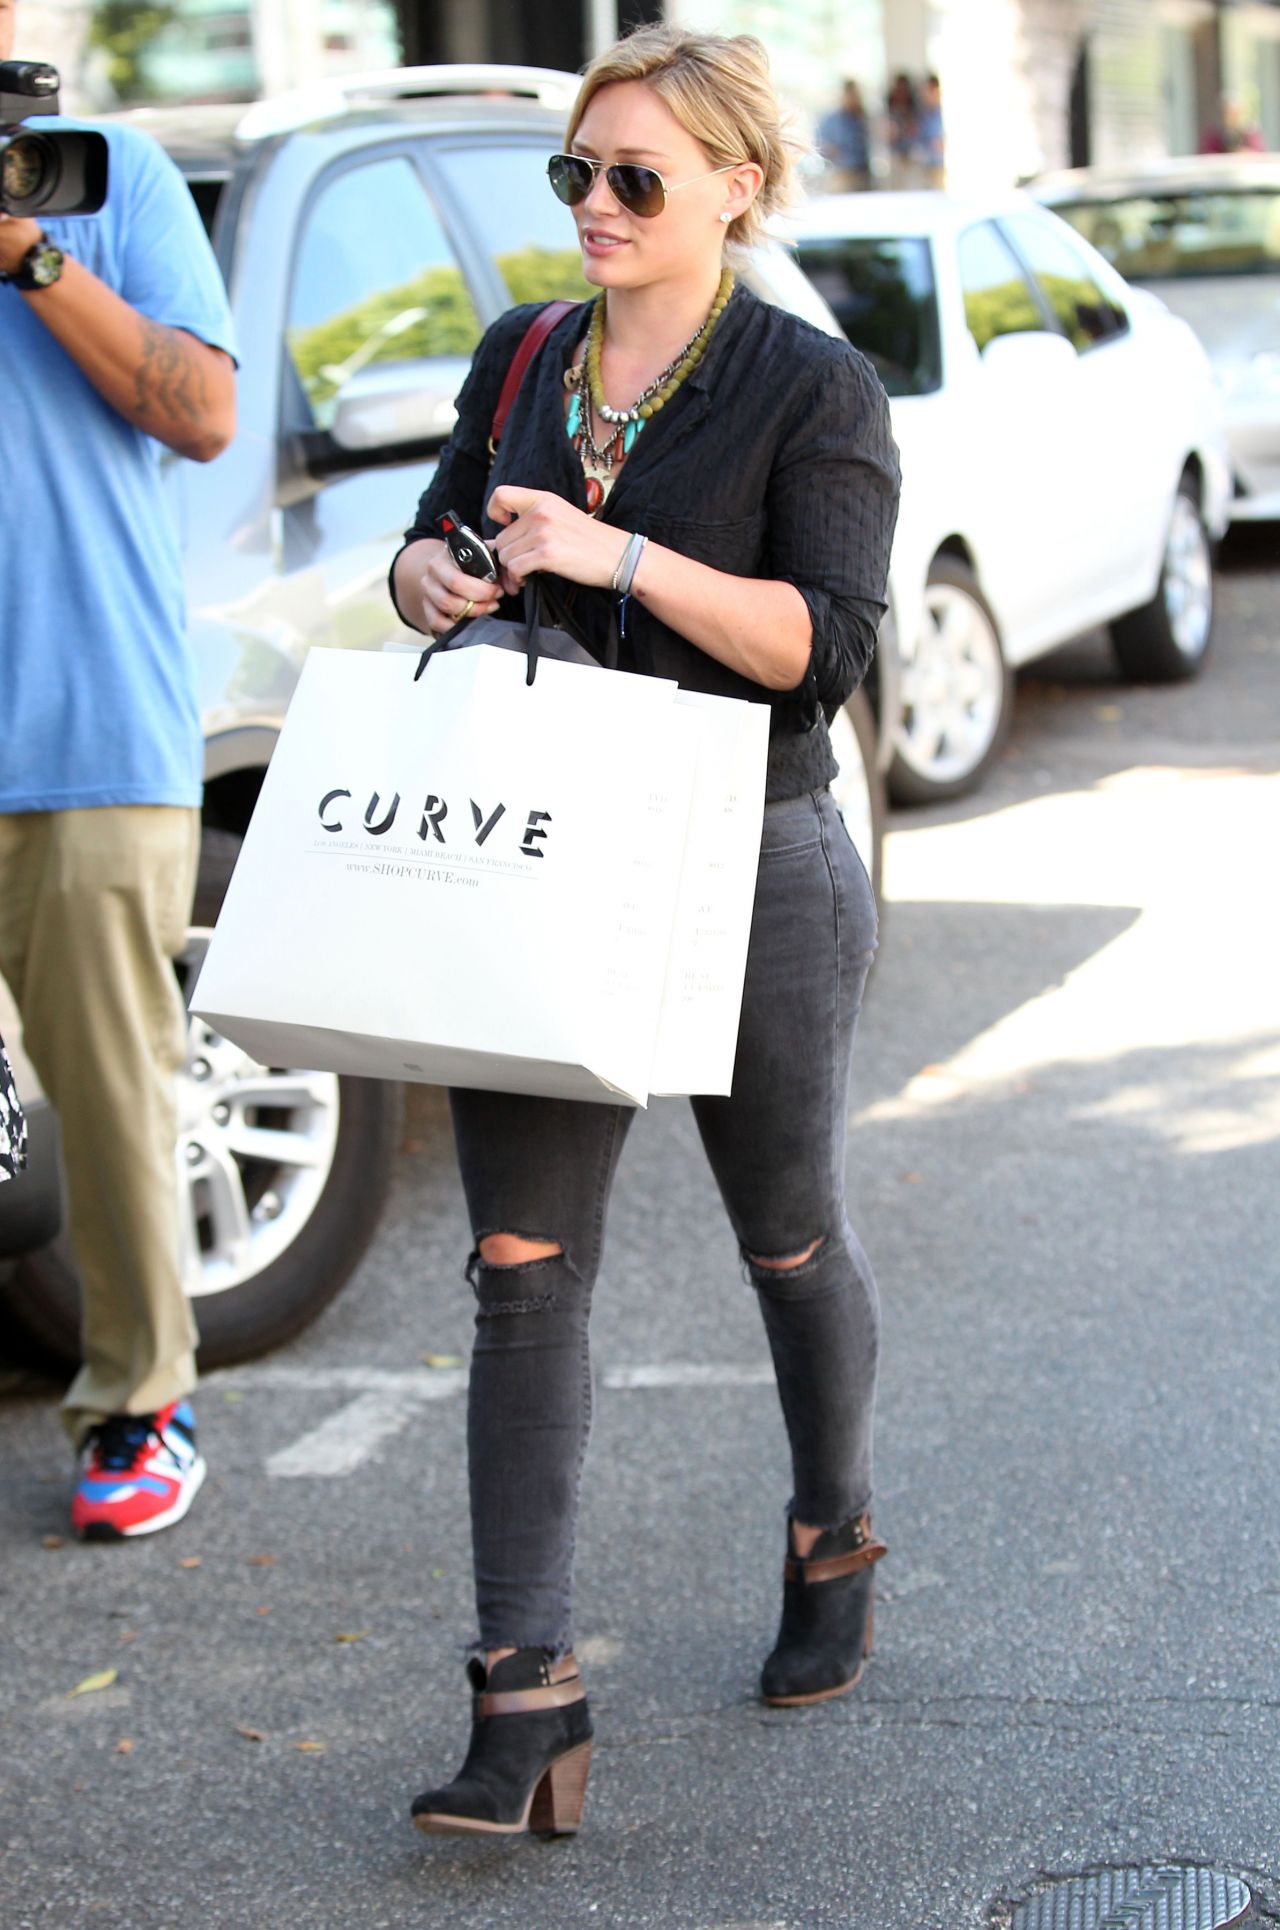 Hilary Duff Out and About in Los Angeles February 8, 2010 – Star Style